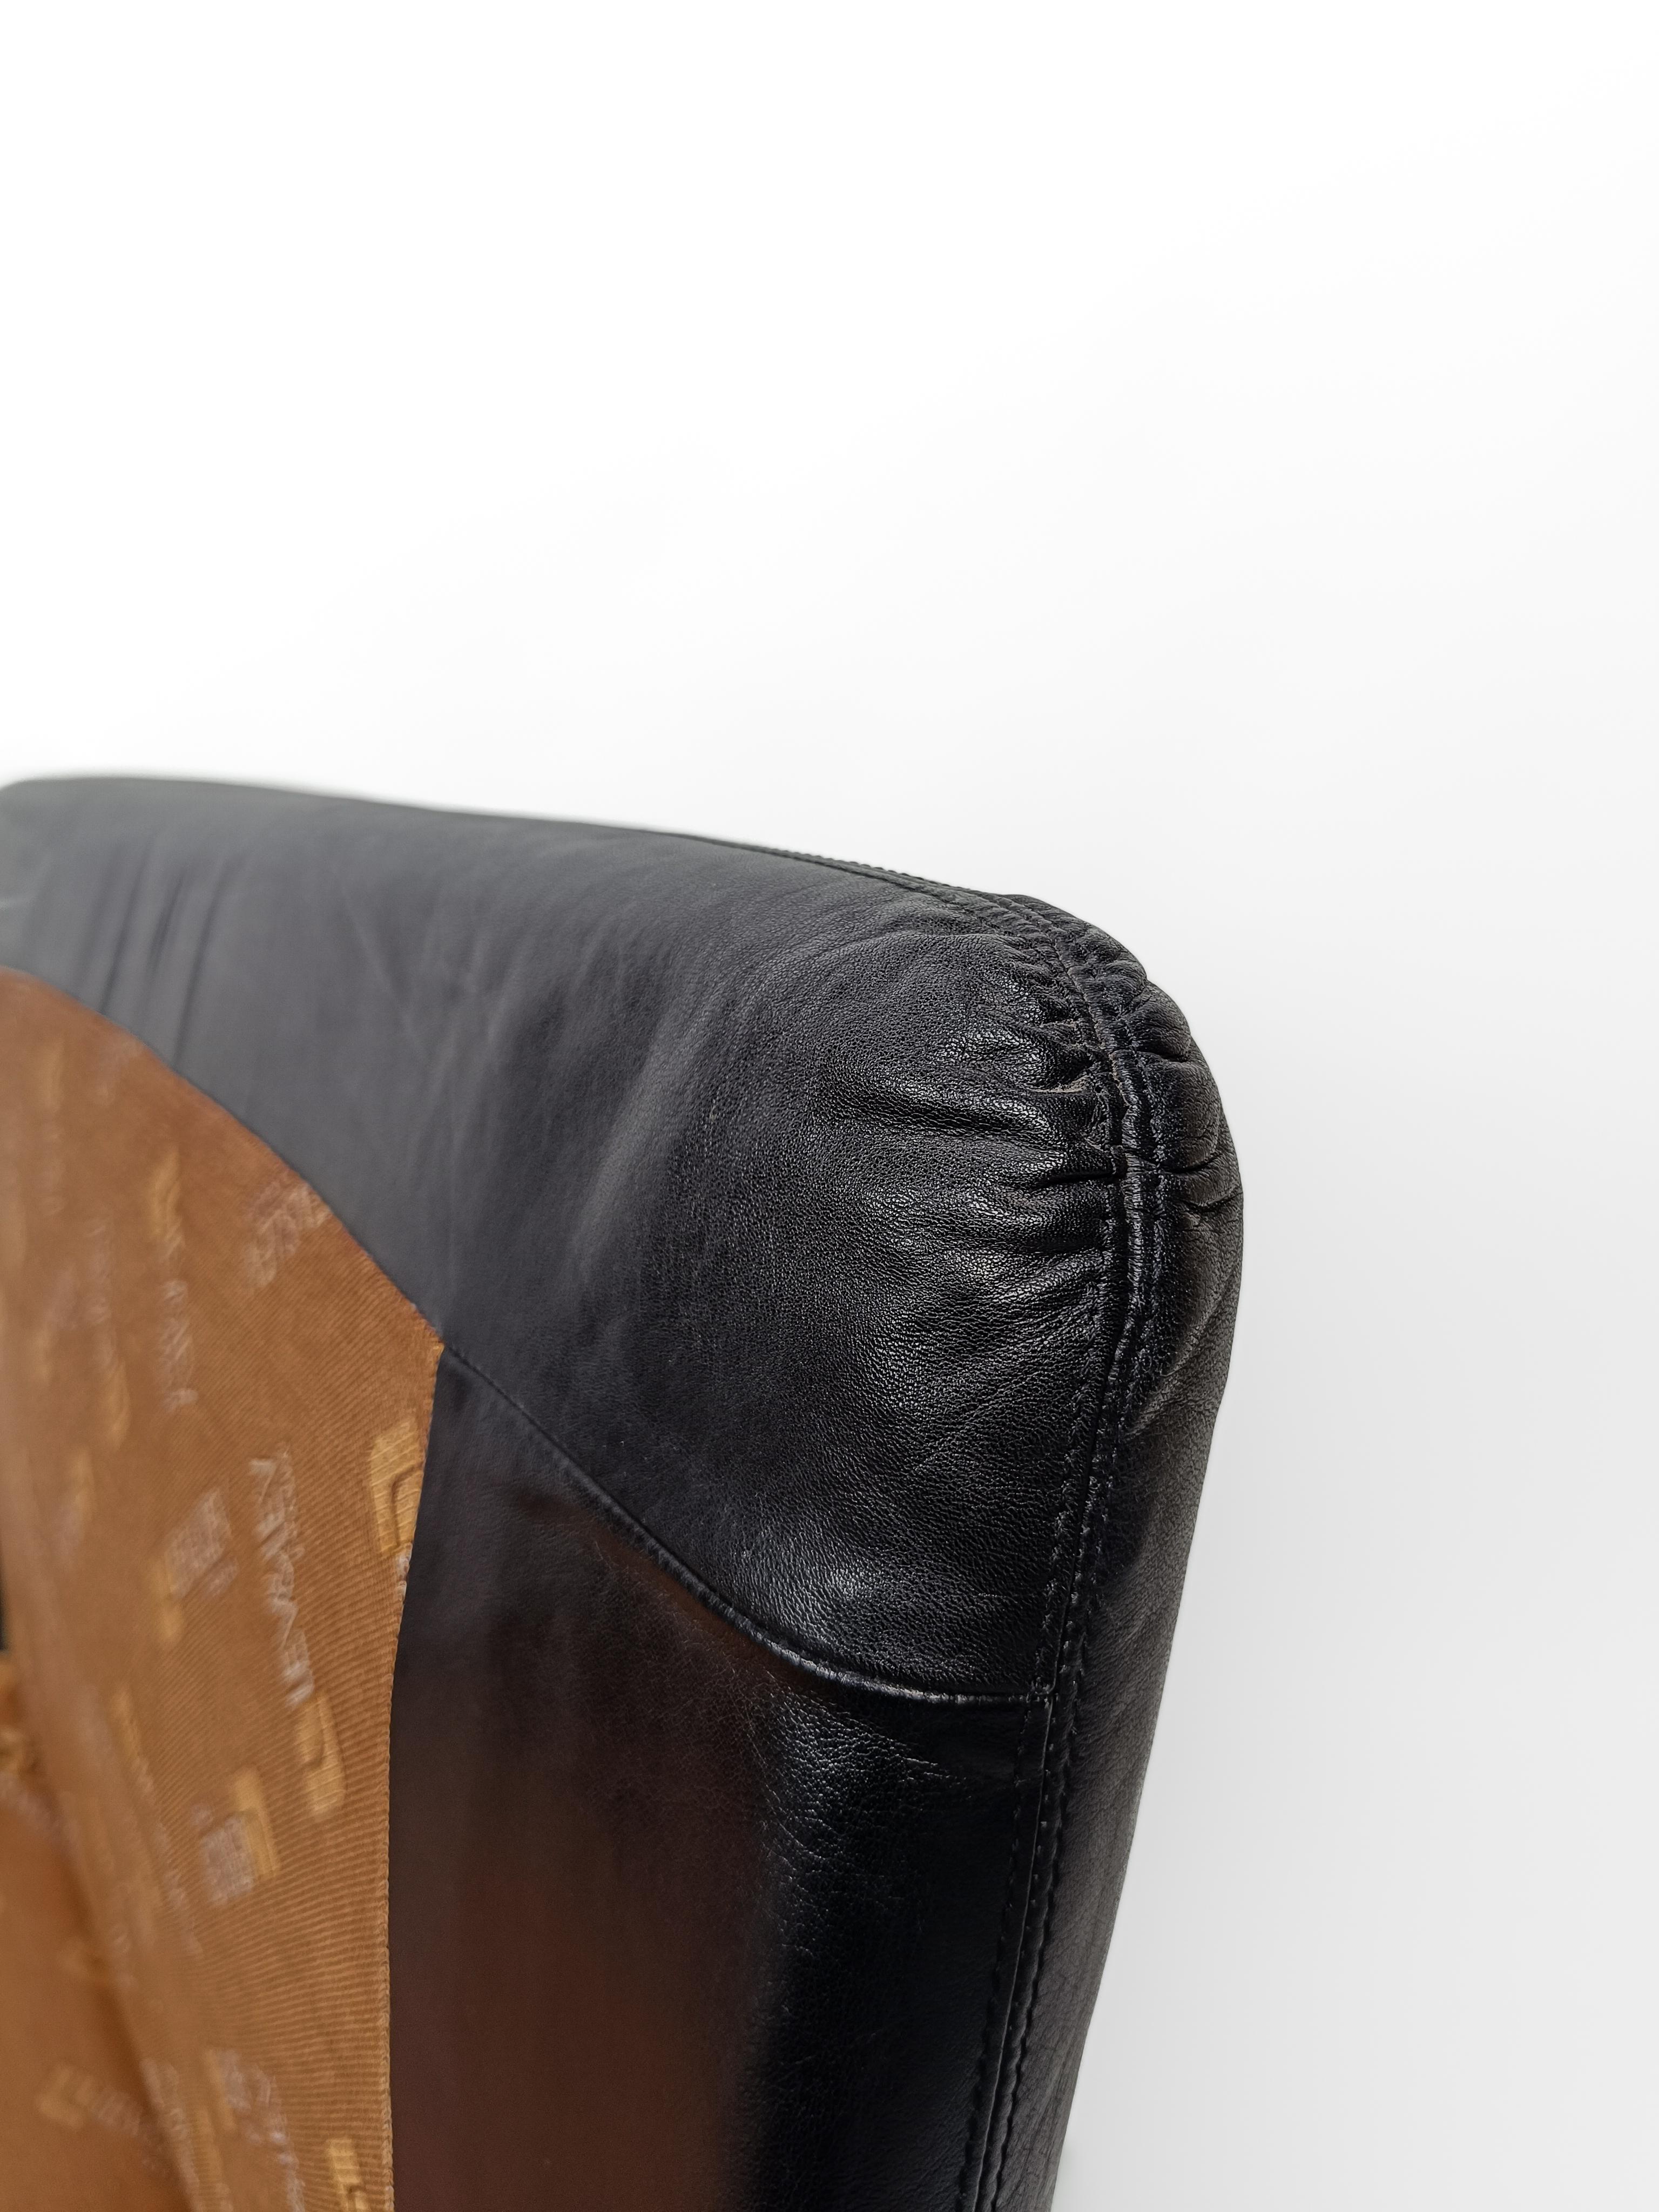 Italian Modular Lounge Chair in Black Leather model PANAREA by Lev & Lev, 1970s  For Sale 8